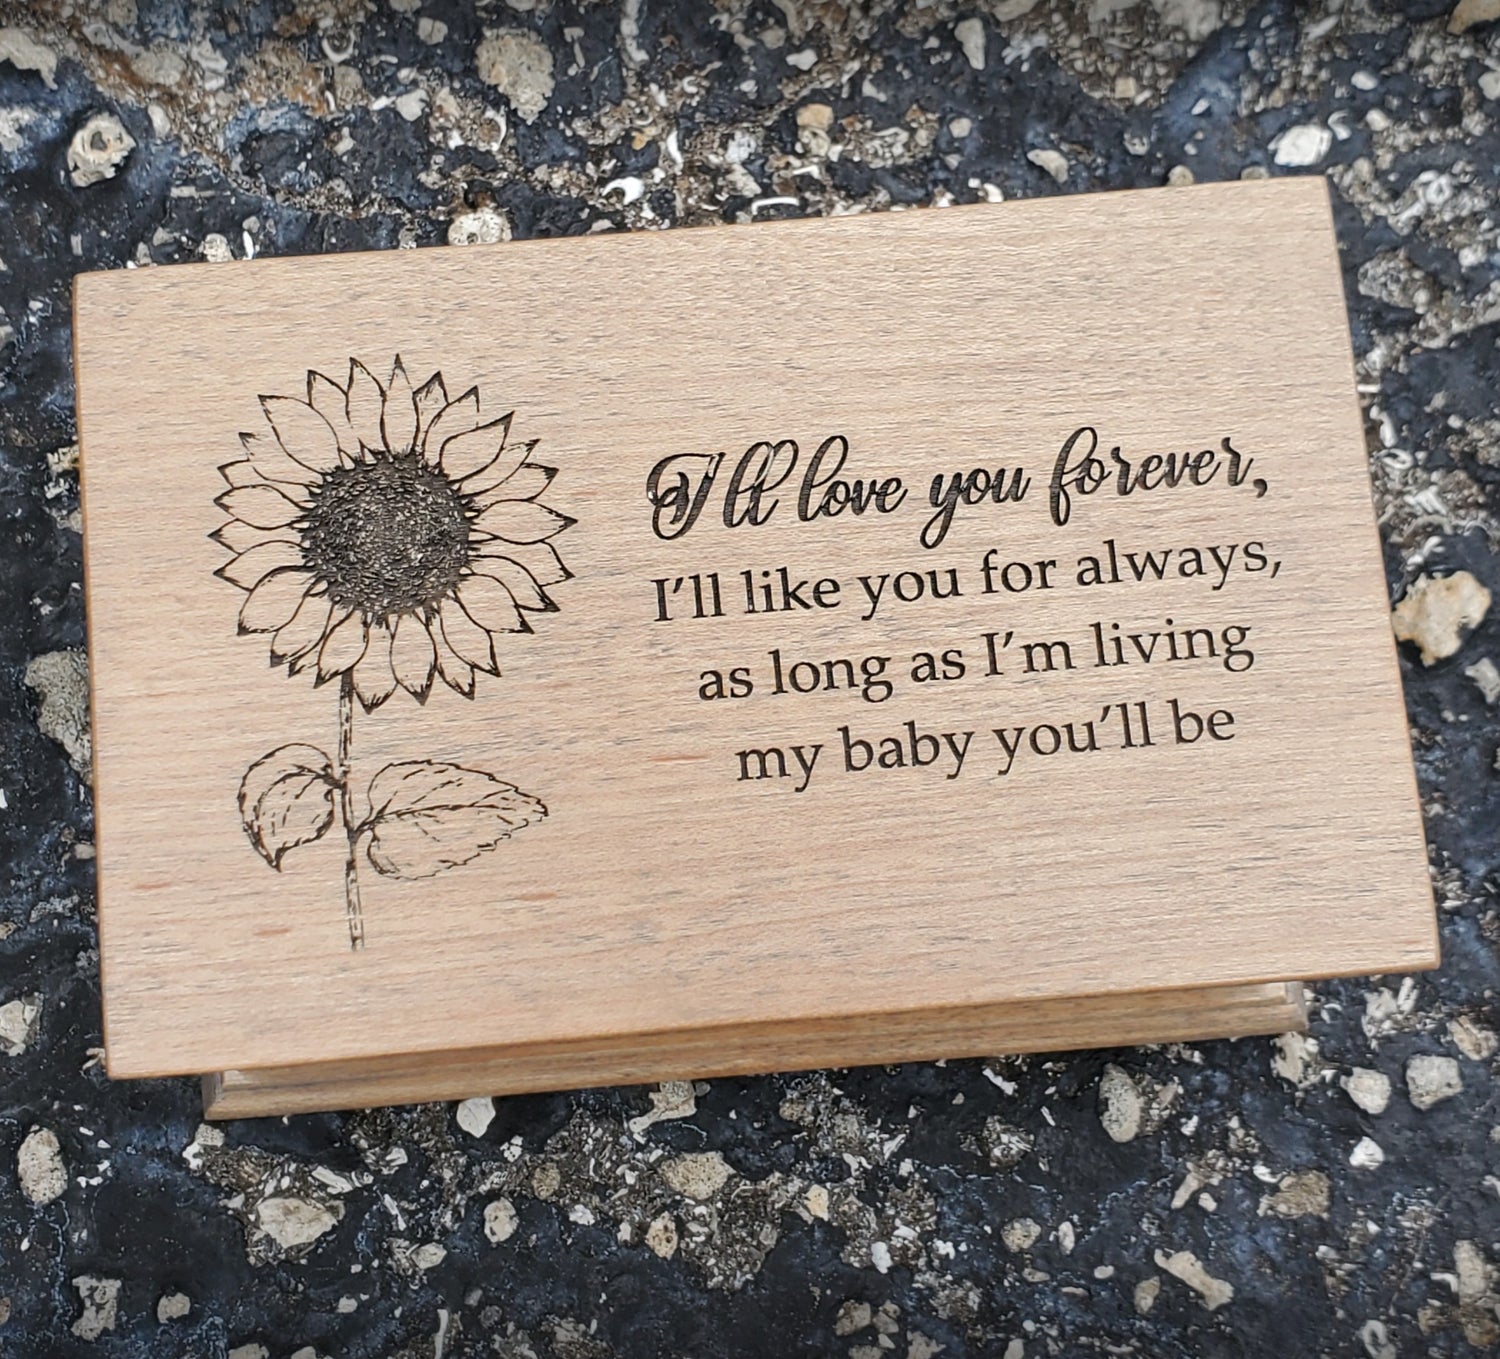 I'll love you forever engraved music jewelry box along with a sunflower image